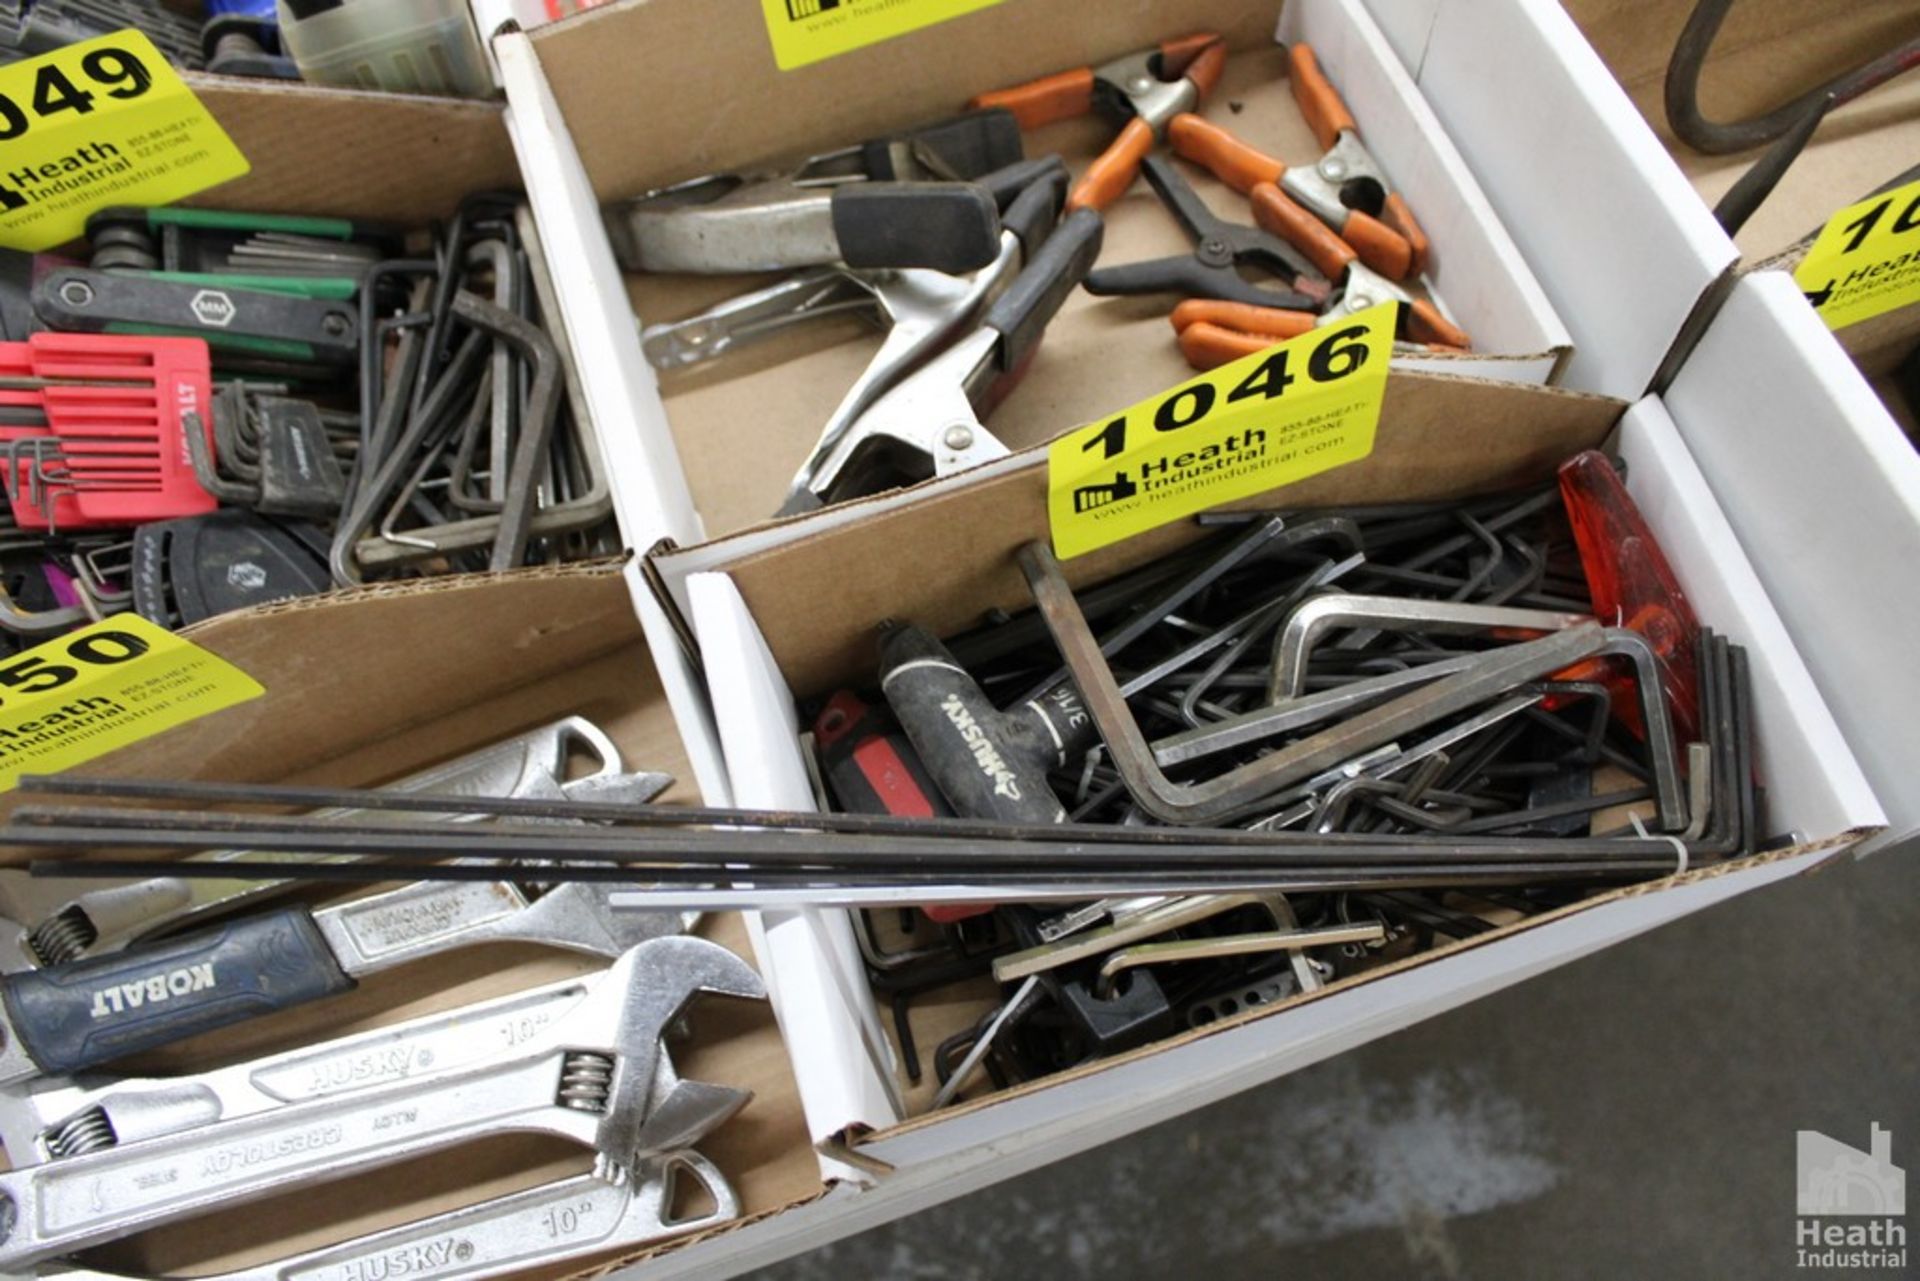 LARGE QUANTITY OF HEX WRENCHES IN BOX